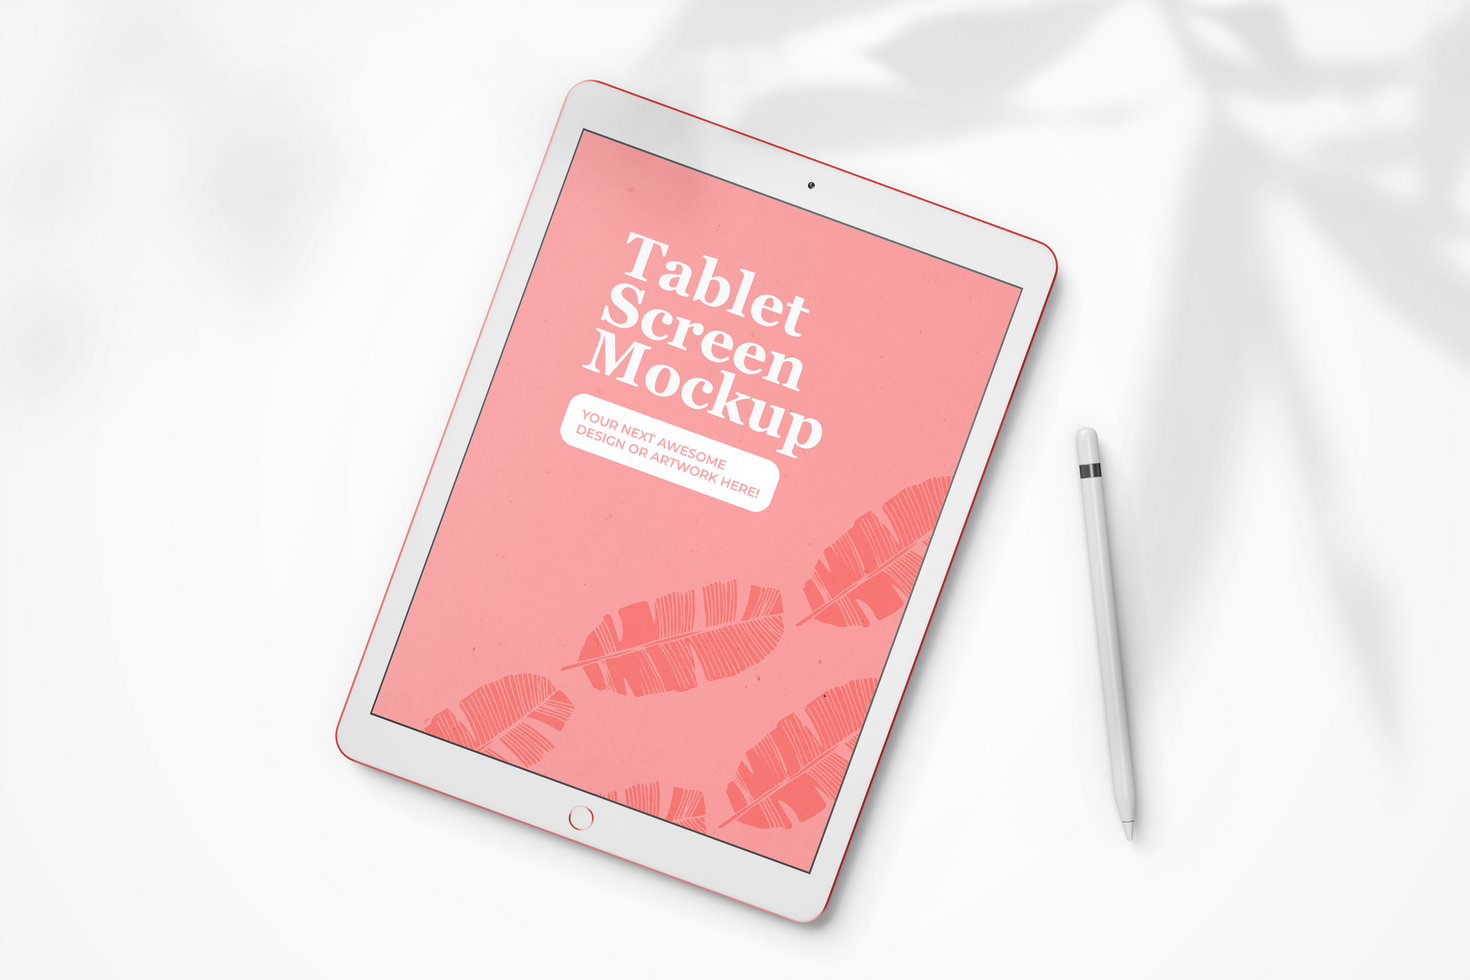 modern 12.9 inch screen display tablet mobile device with pencil realistic mockup template psd